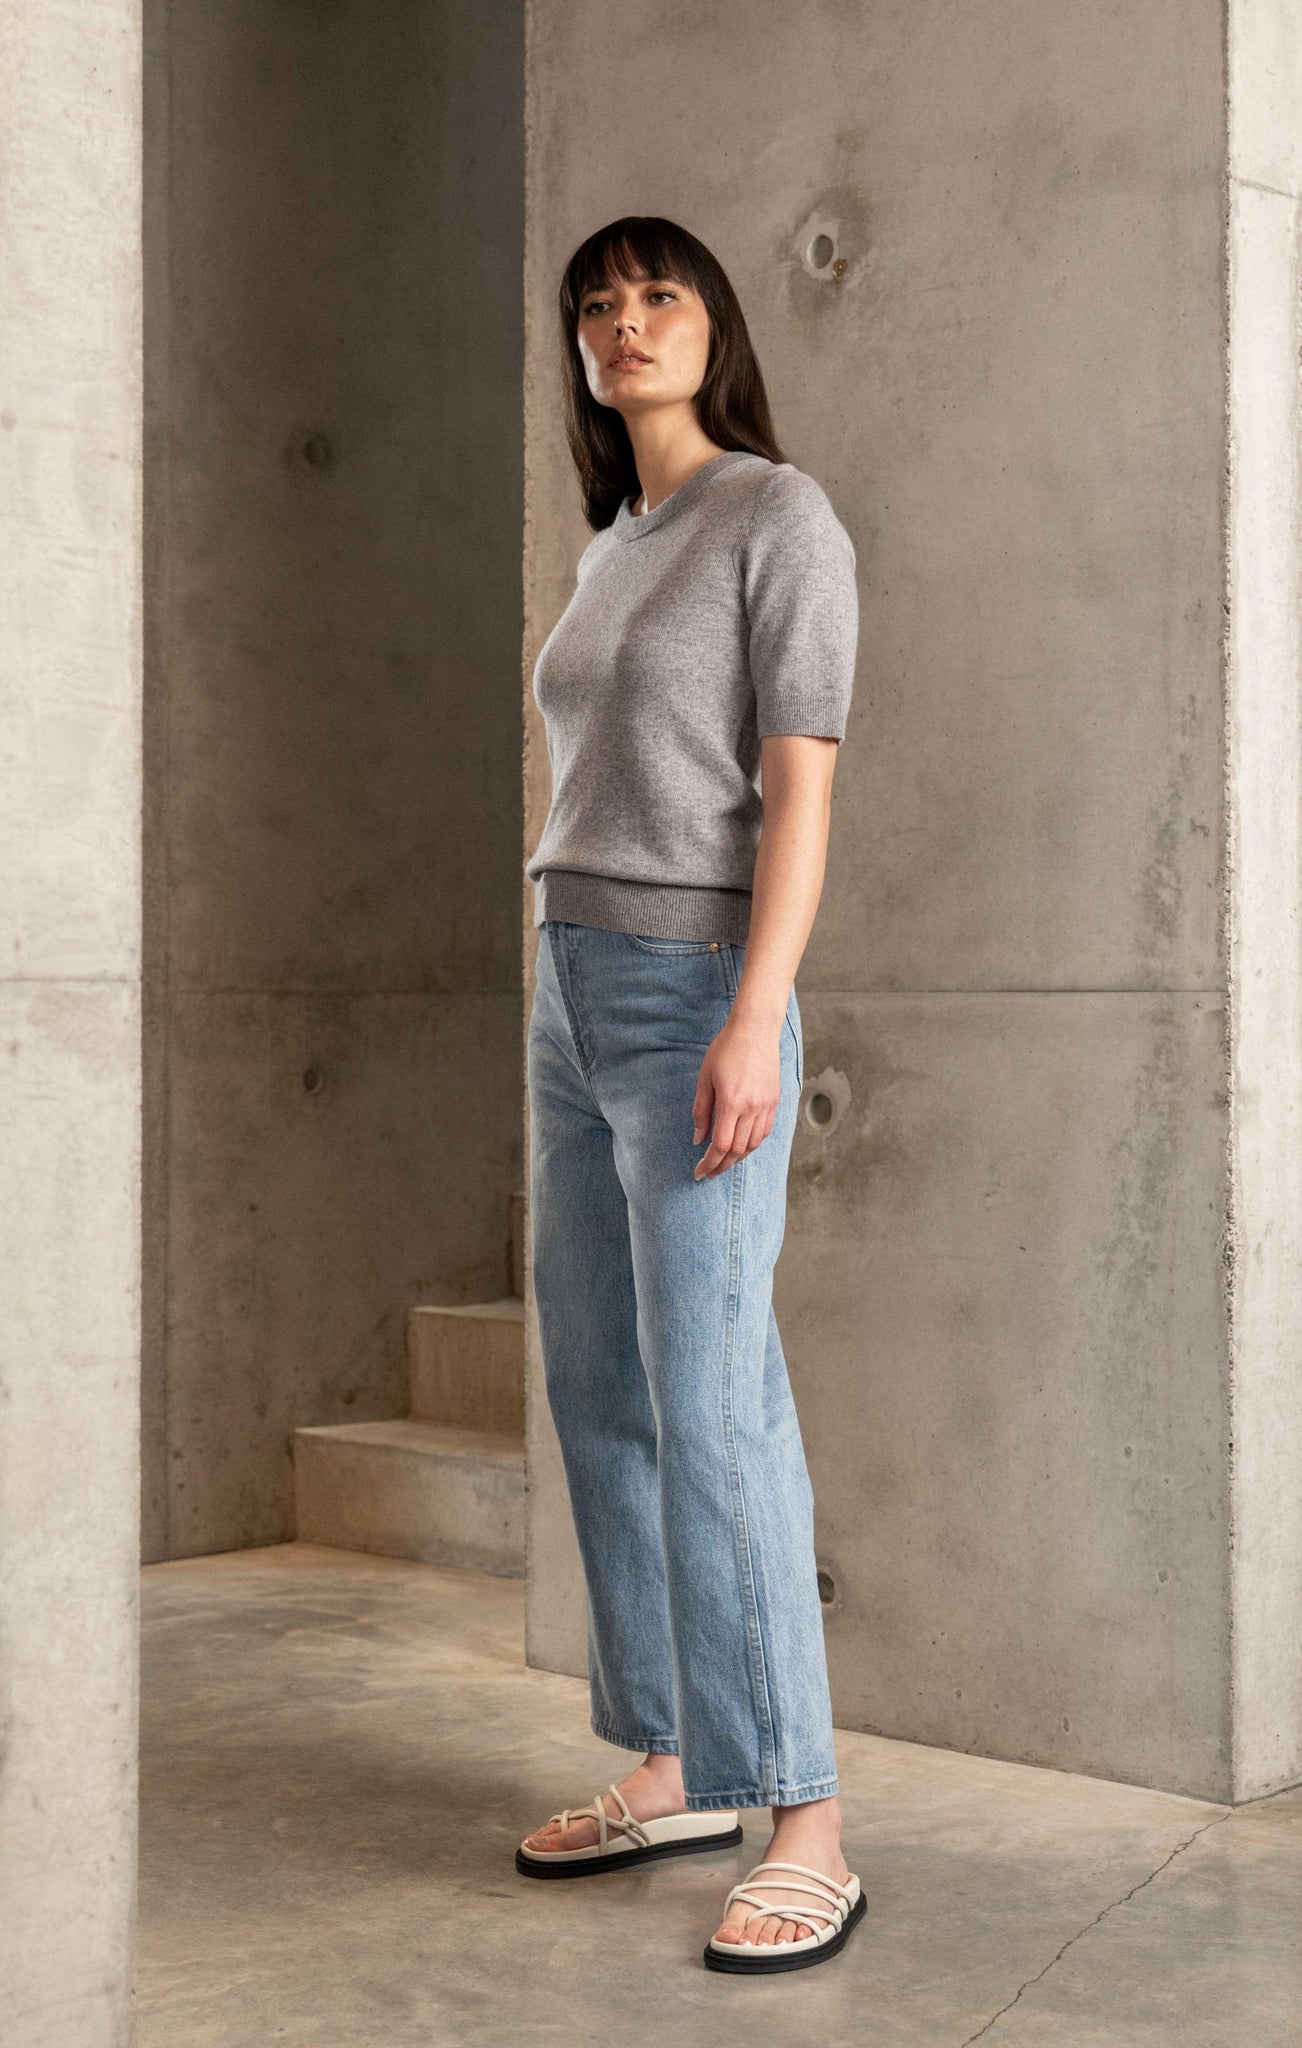 Cashmere Tee -  Skin and Threads